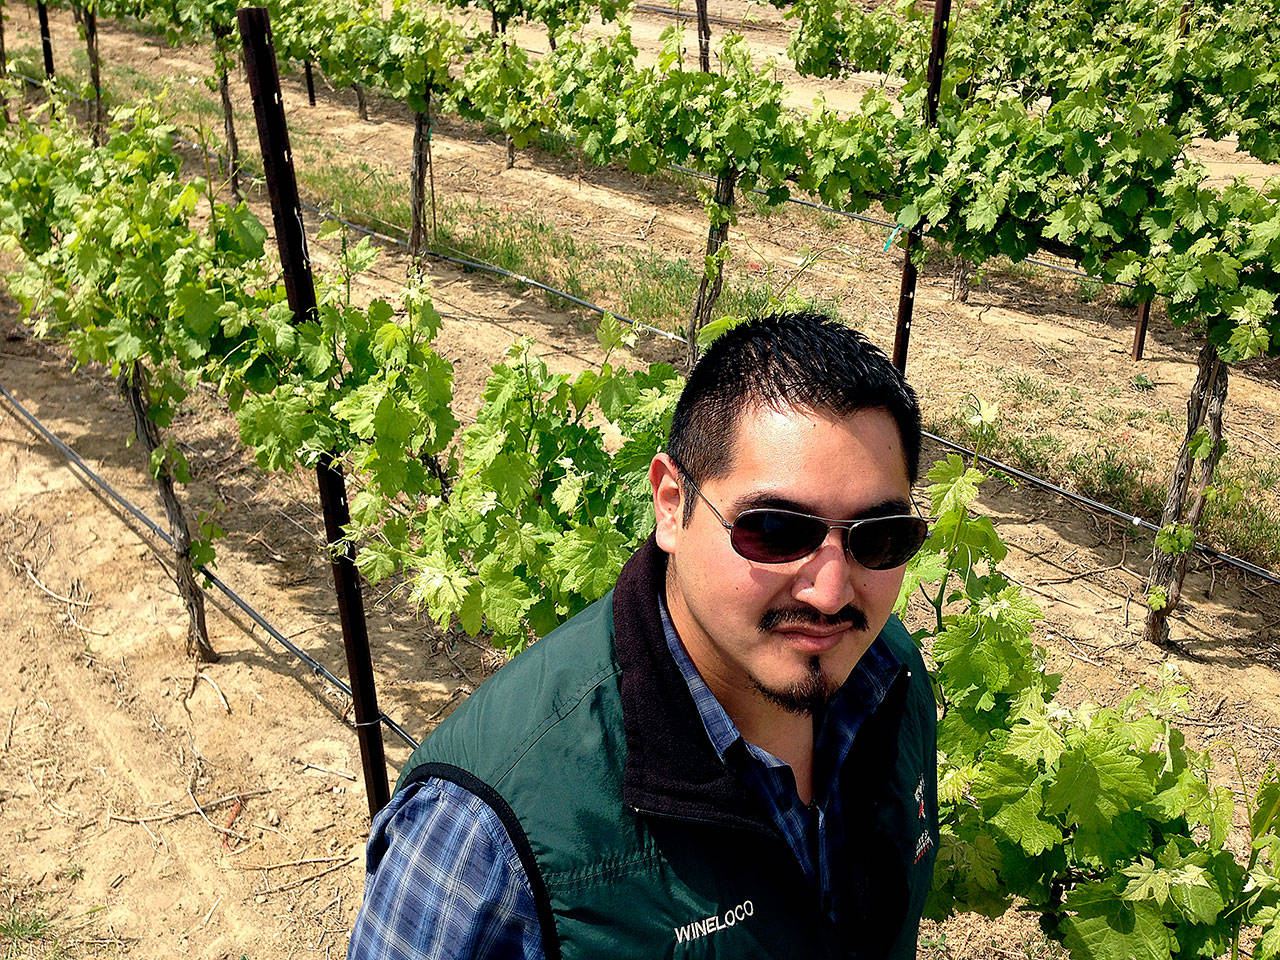 Victor Palencia owns Palencia Wine Co. in Walla Walla. His 2014 Grenache won best in show at the 2017 Walla Walla Valley Wine Competition. (Photo by Andy Perdue/Great Northwest Wine)